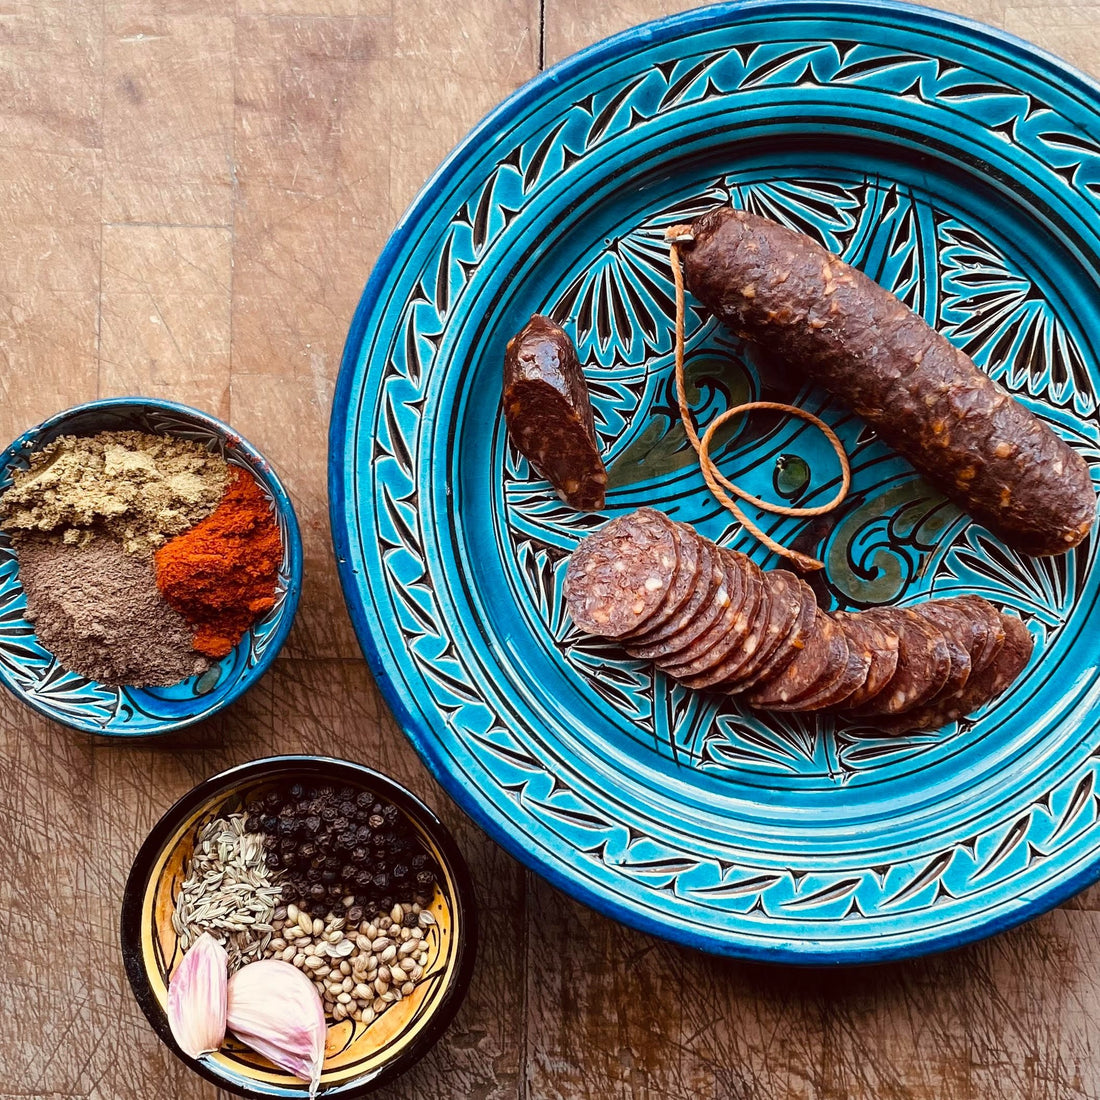 Beautiful plate of pork merguez salami. Vibrant blue plate with a variety of spices